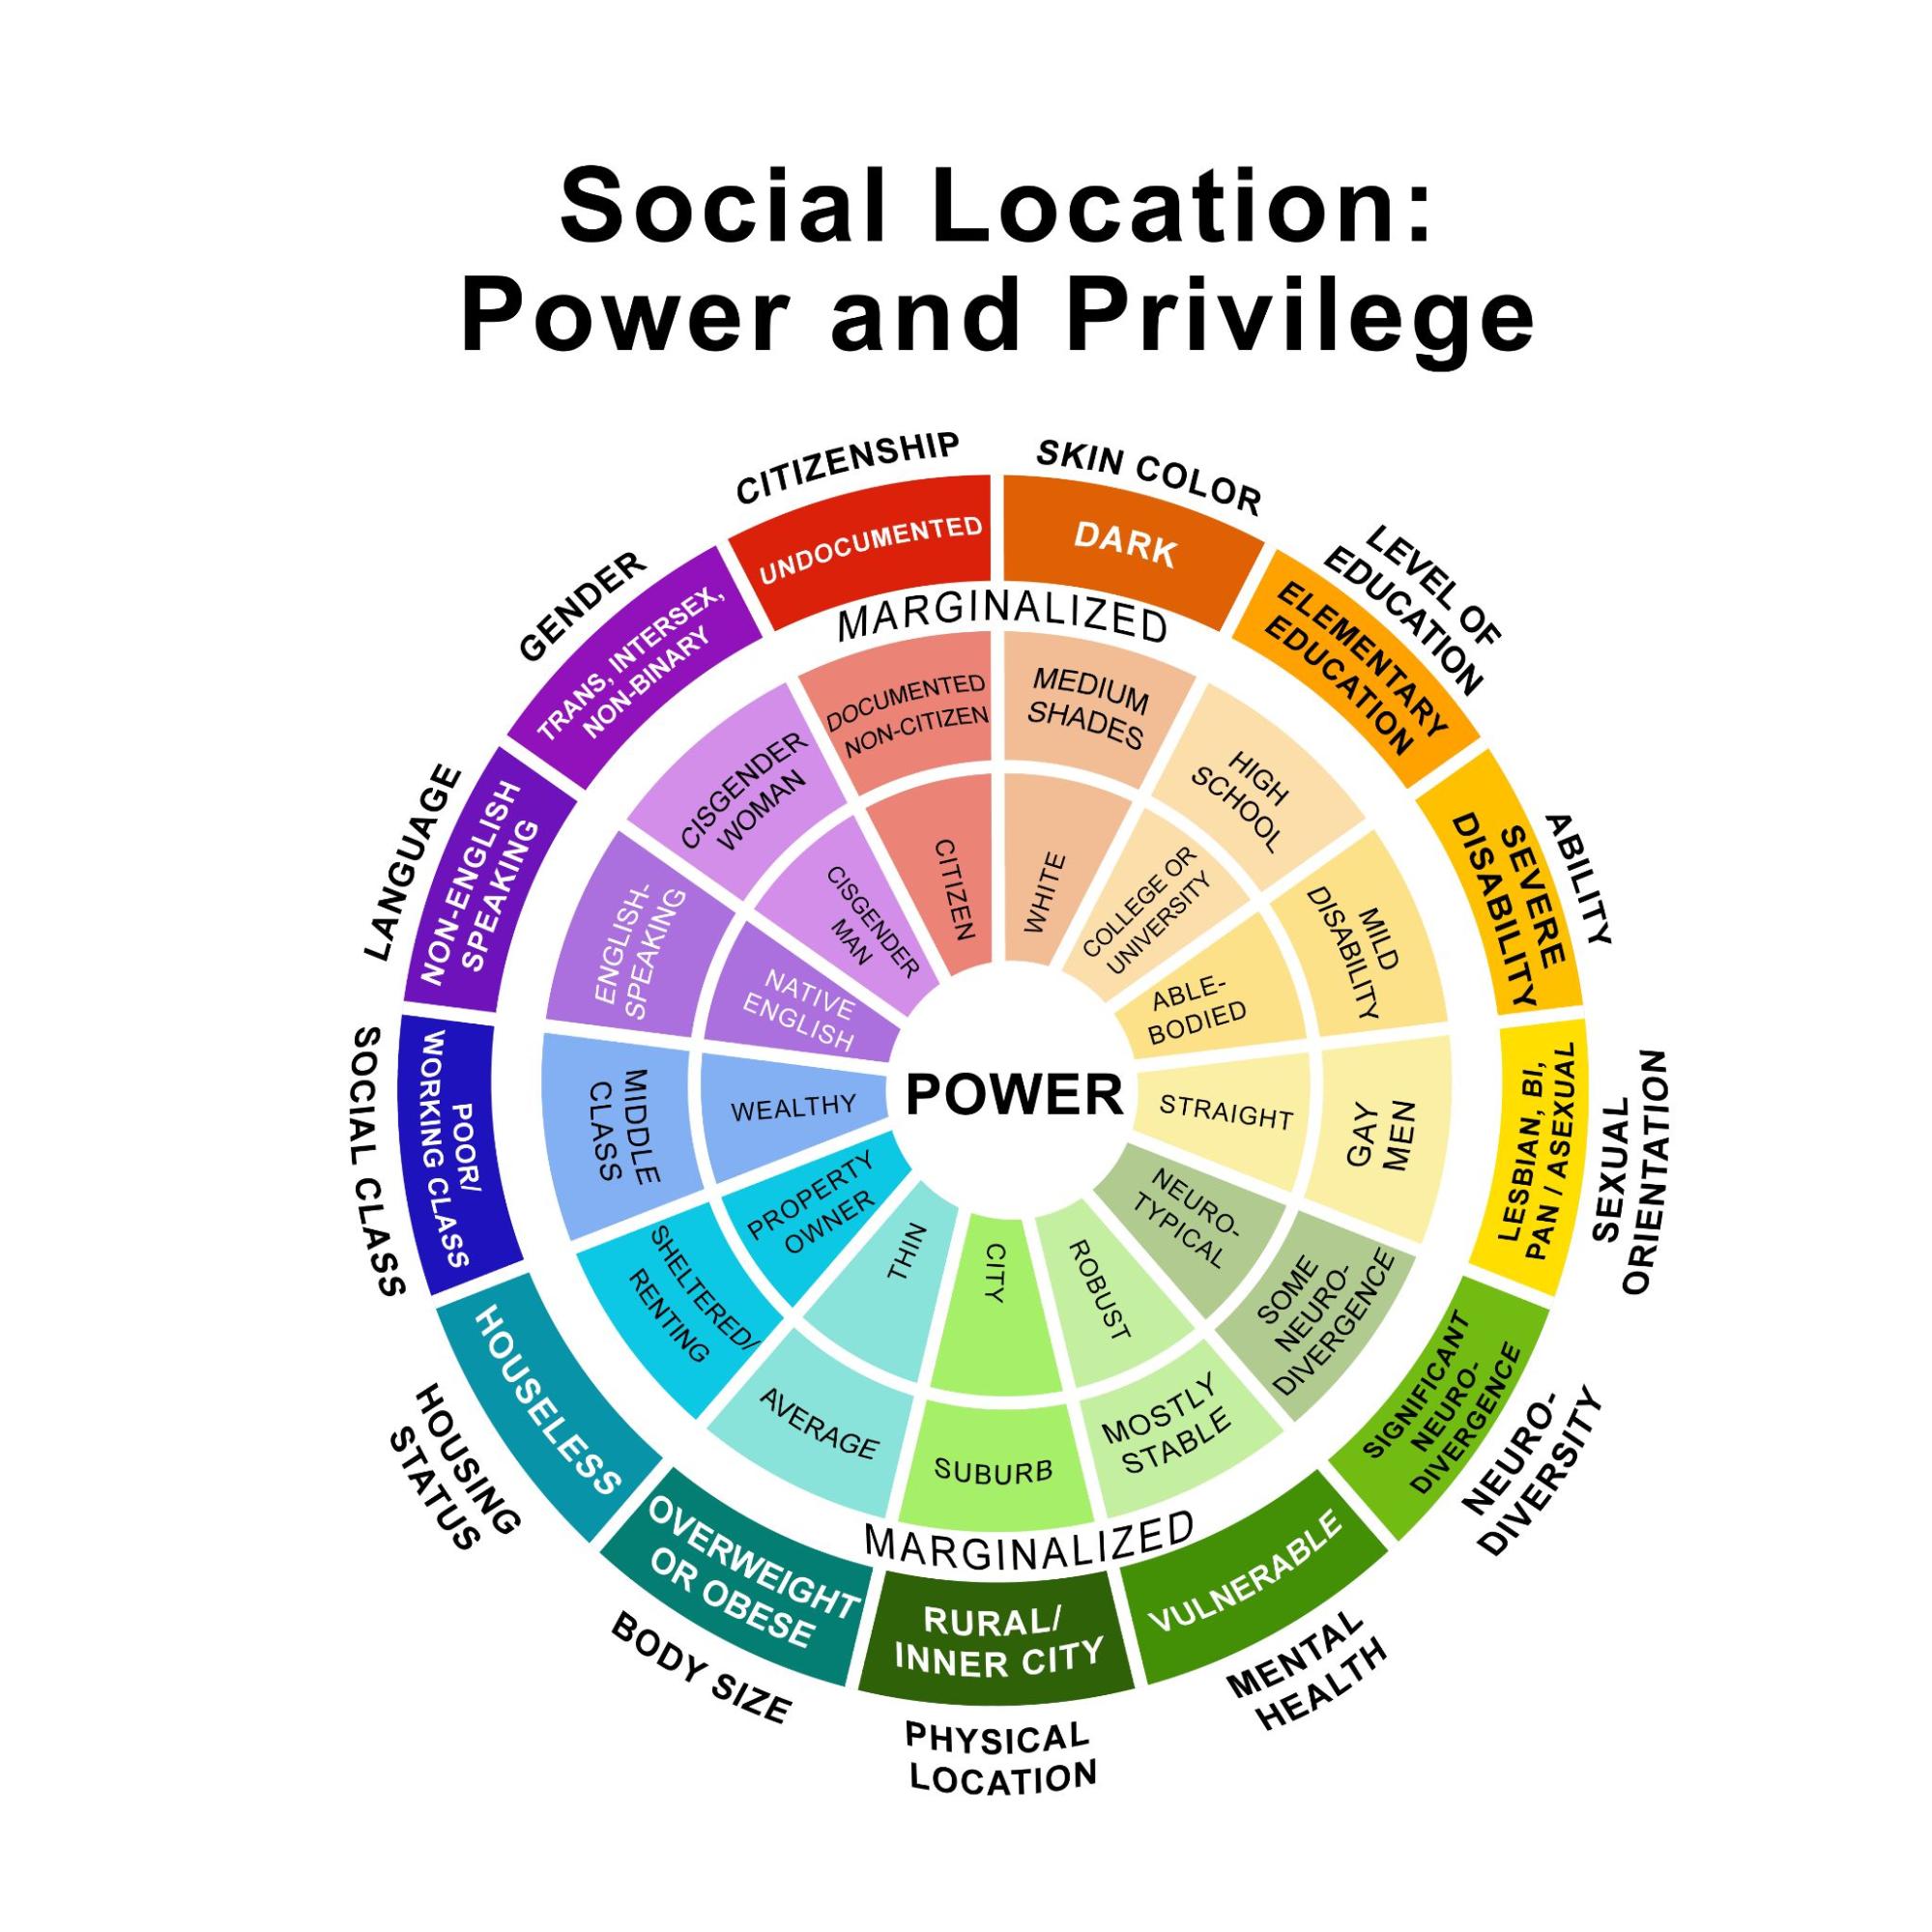 A colorful wheel of social location defined by power and privilege (See image description)